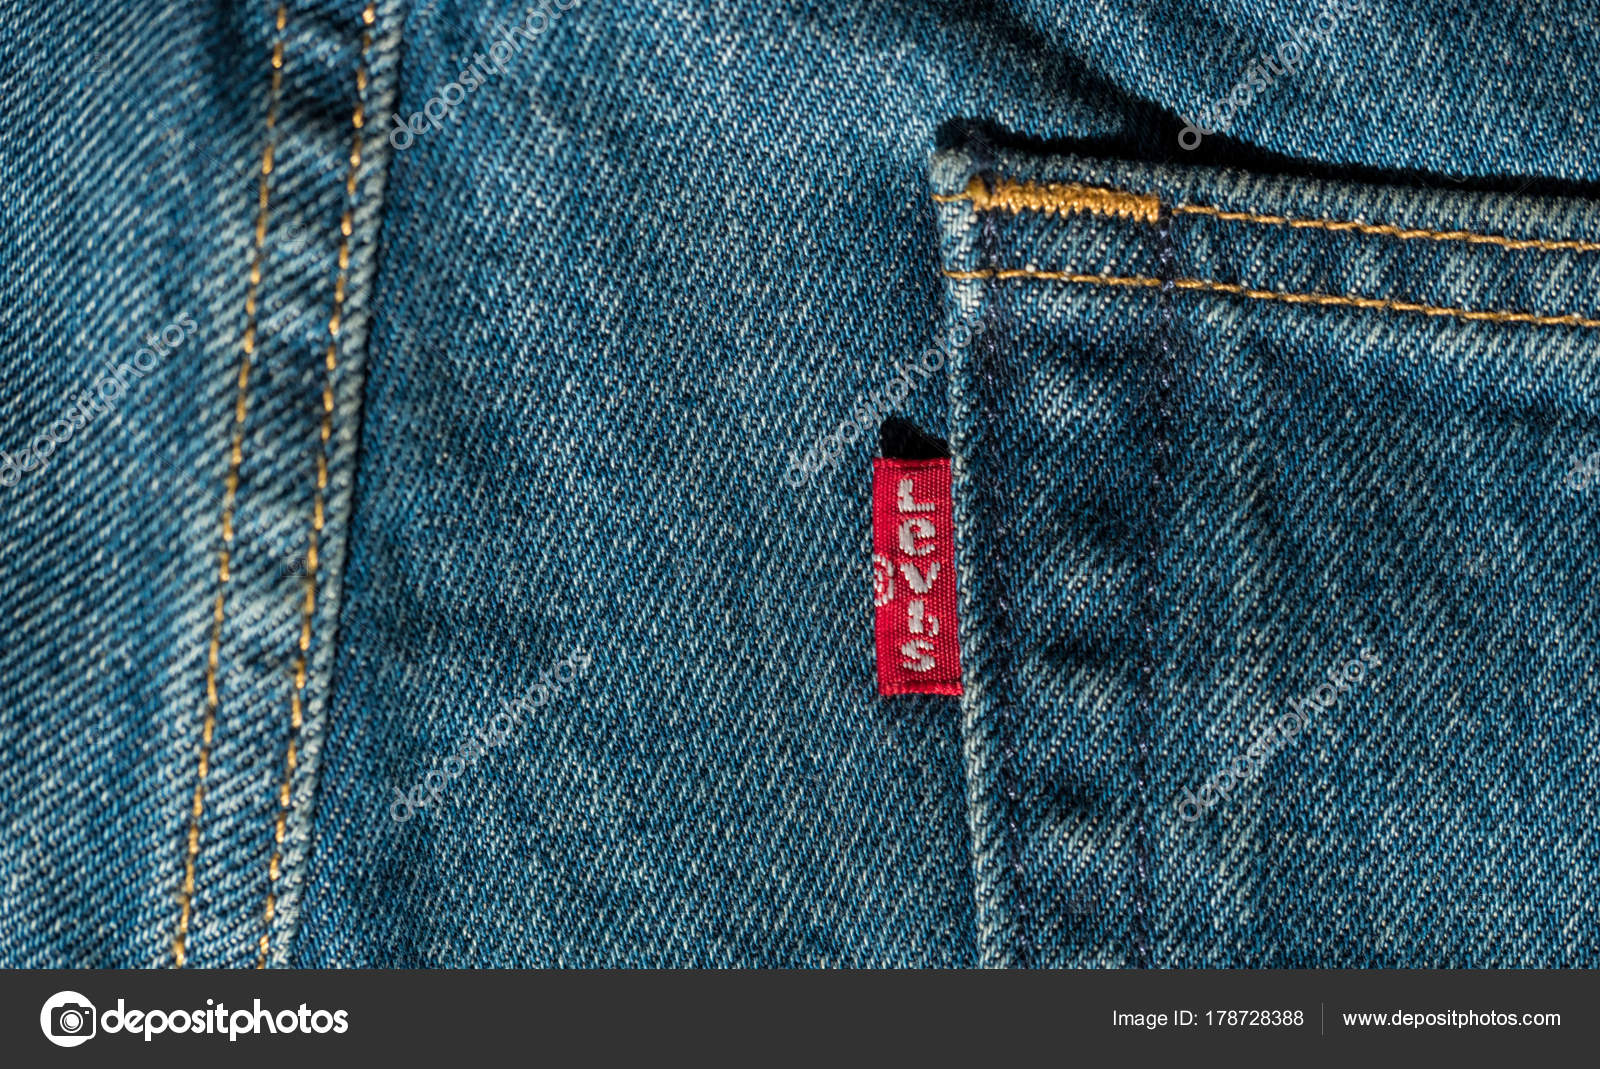 Close up of the LEVI'S label on a blue jeans – Stock Editorial Photo ©  rclassenlayouts #178728388